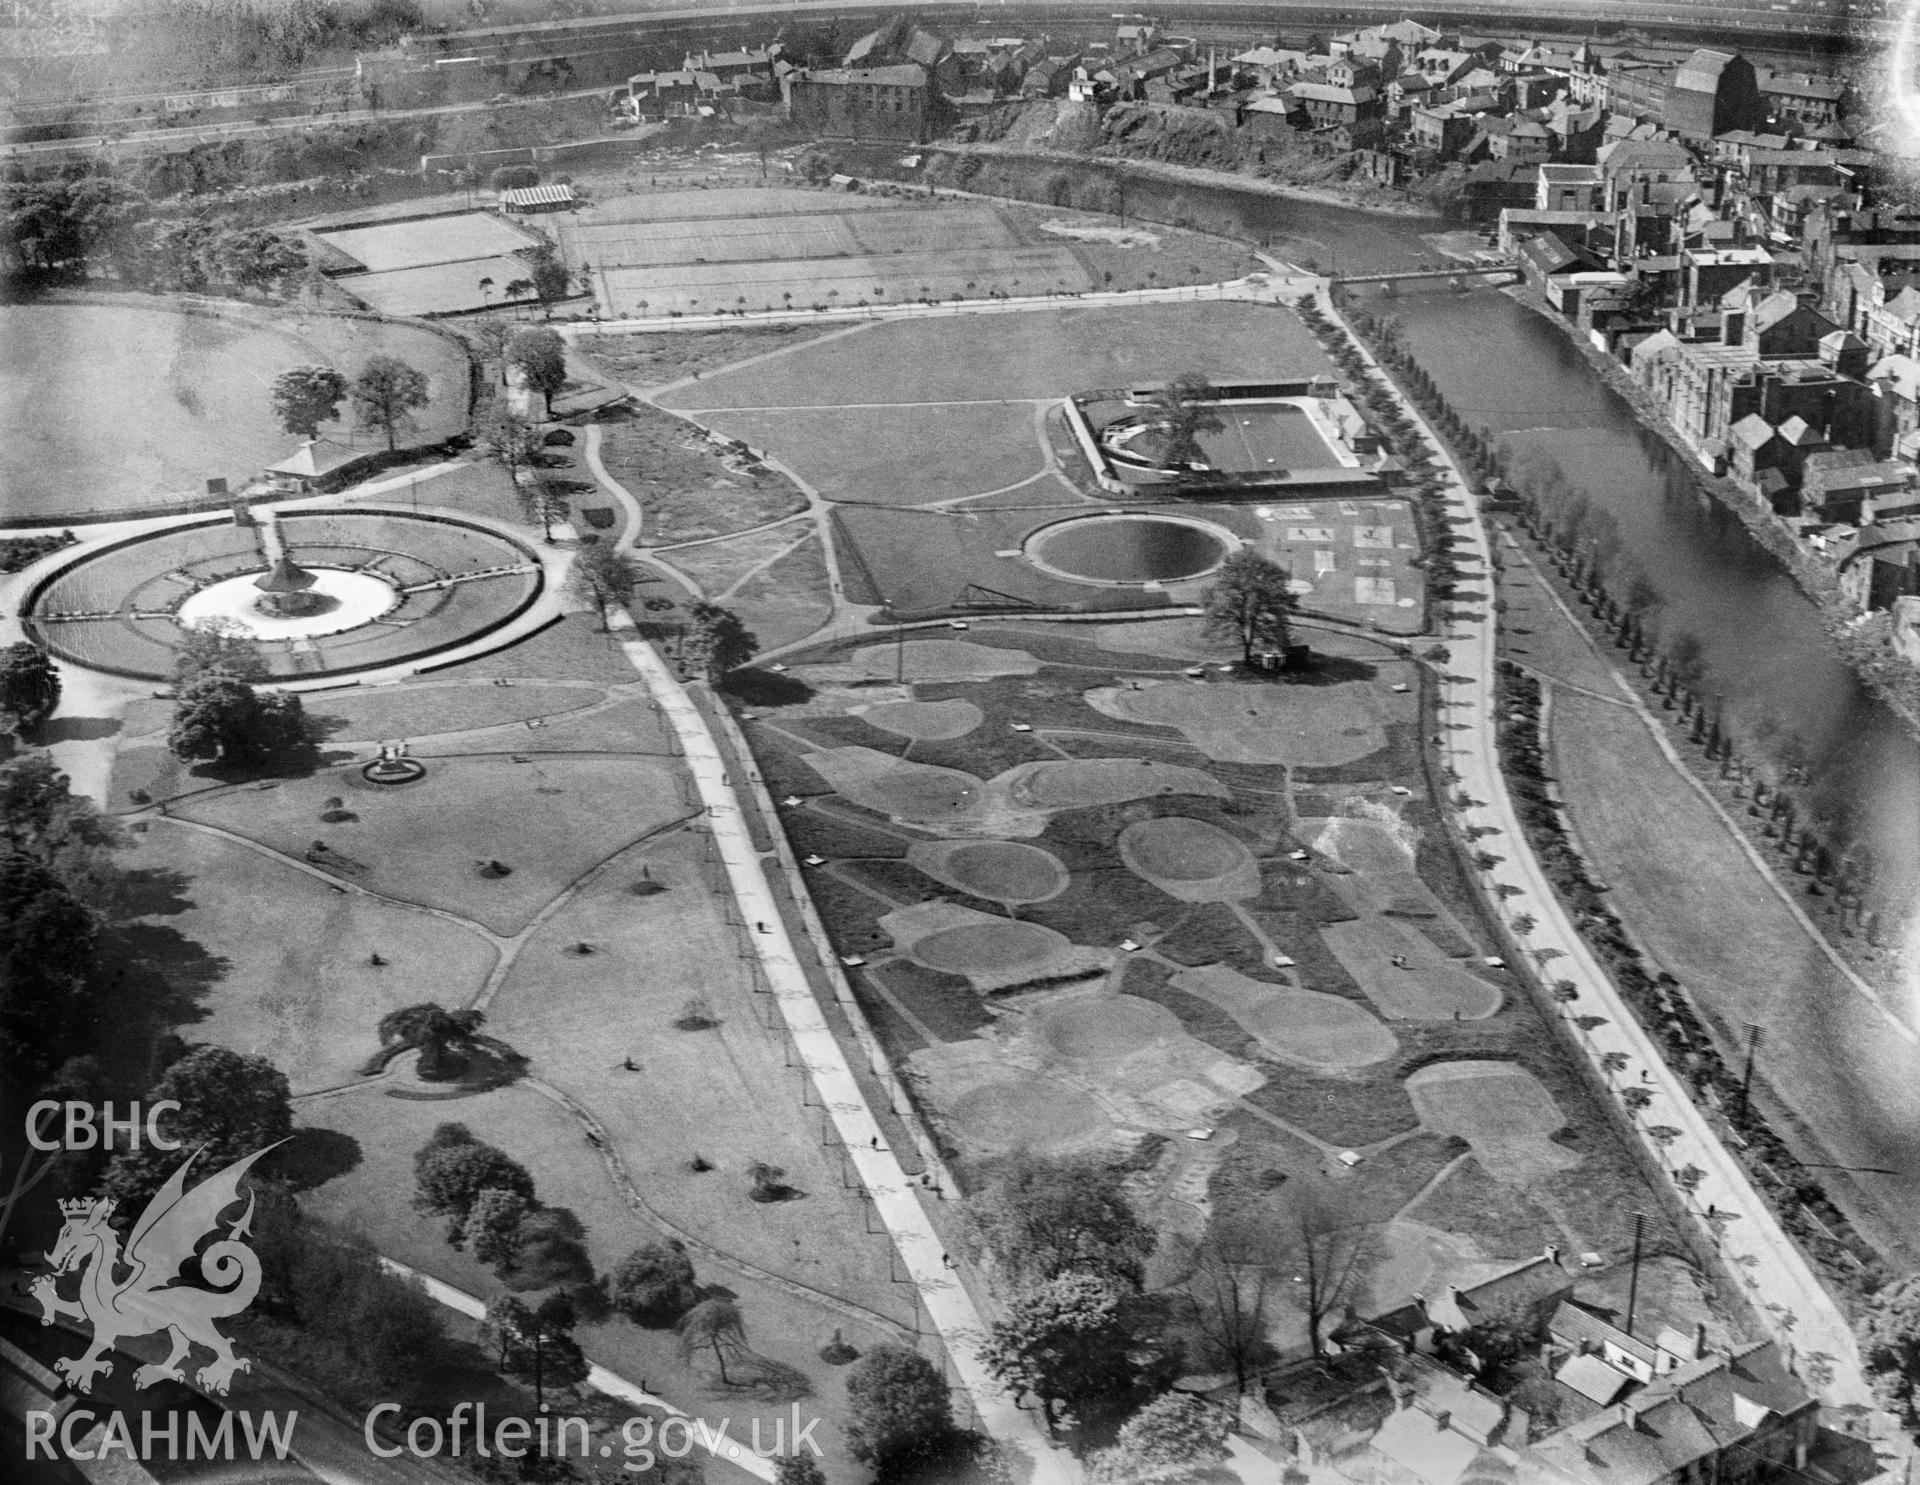 View of Ynysangharad Park and swimming pool, oblique aerial view. 5?x4? black and white glass plate negative.